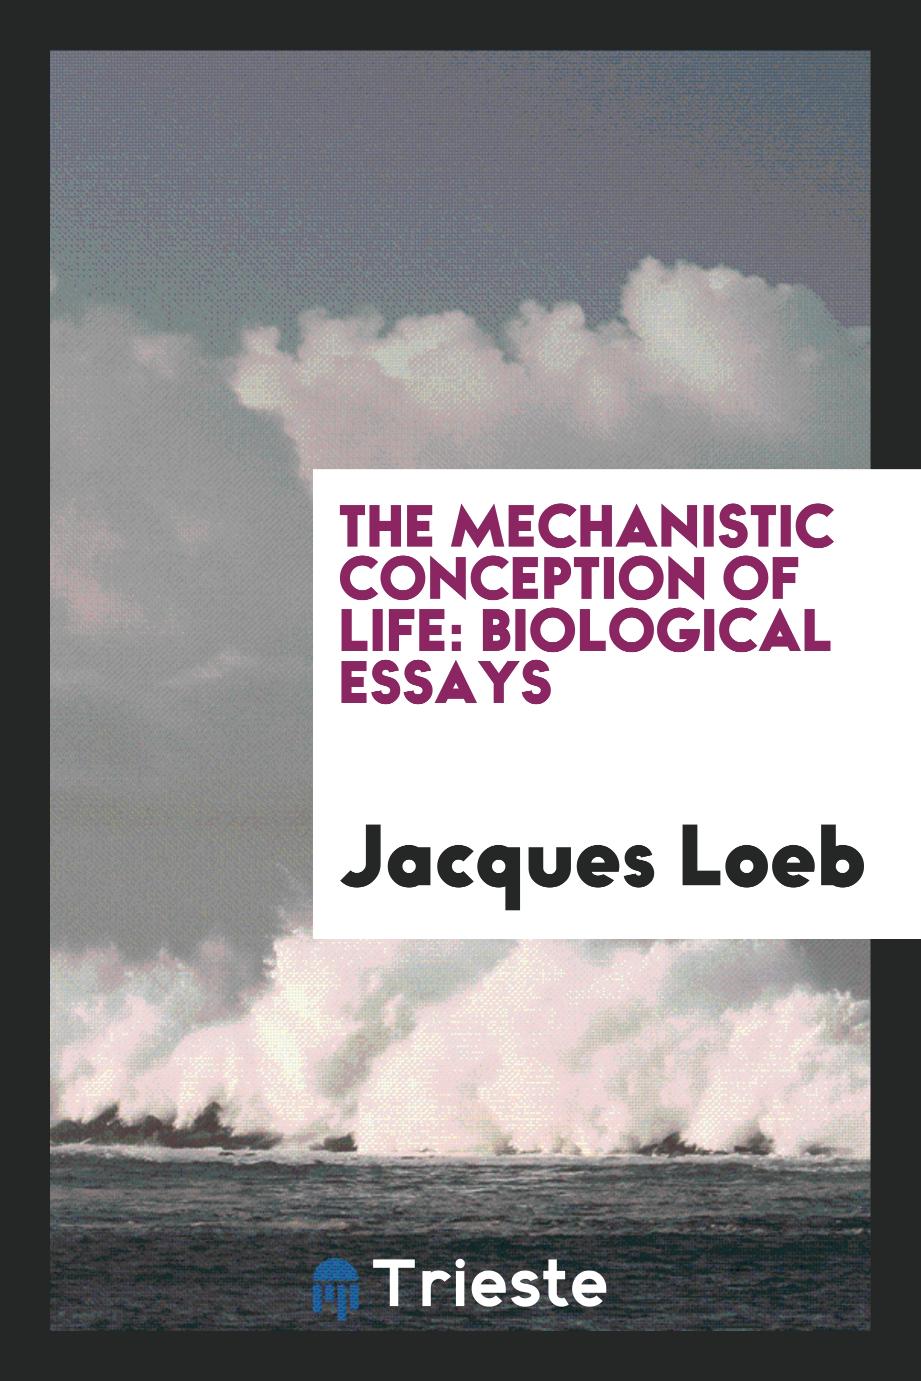 The mechanistic conception of life: biological essays